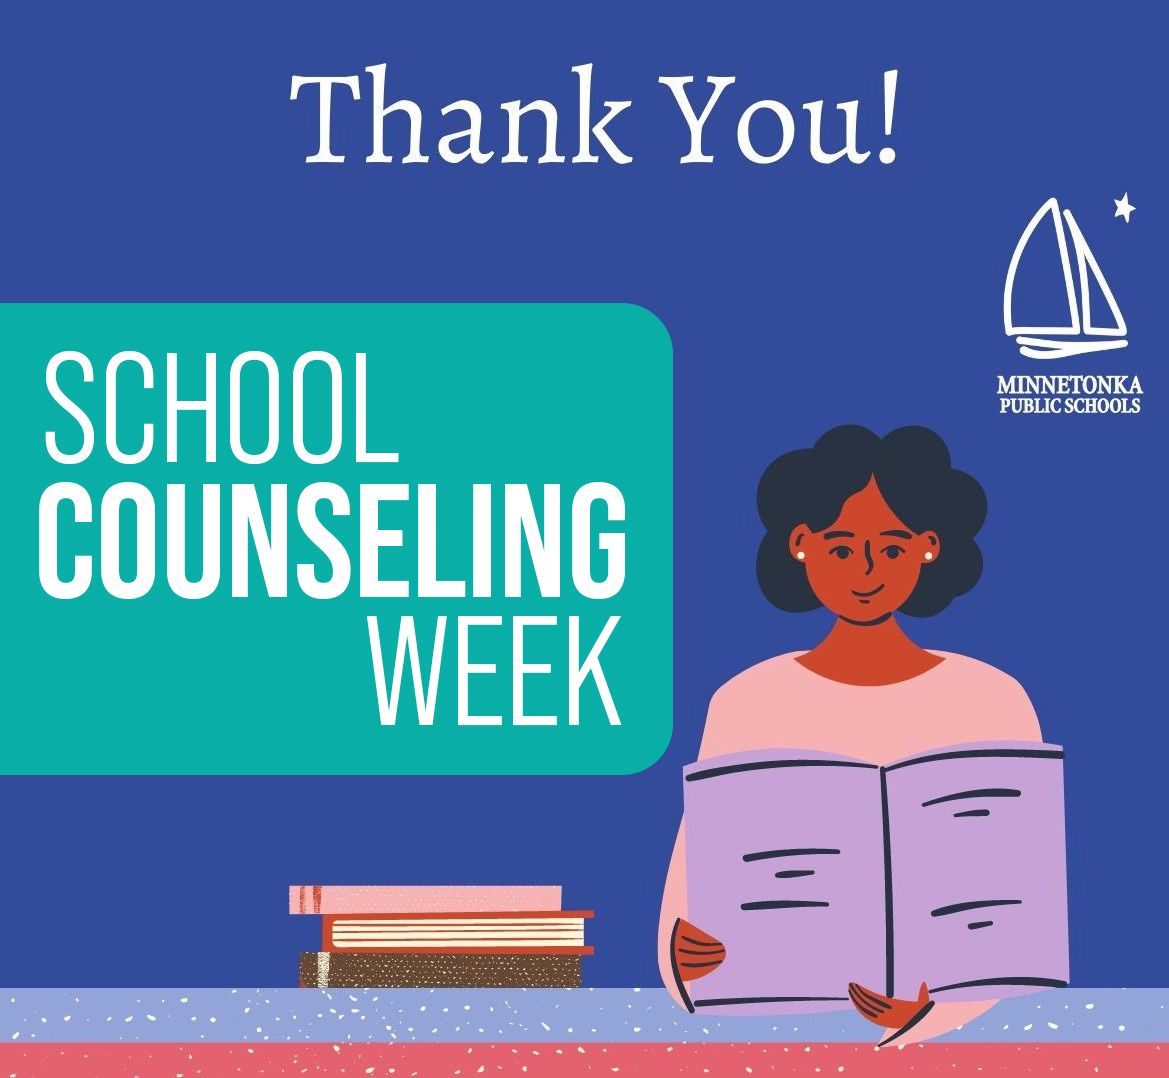 Thank you, School Counselors!